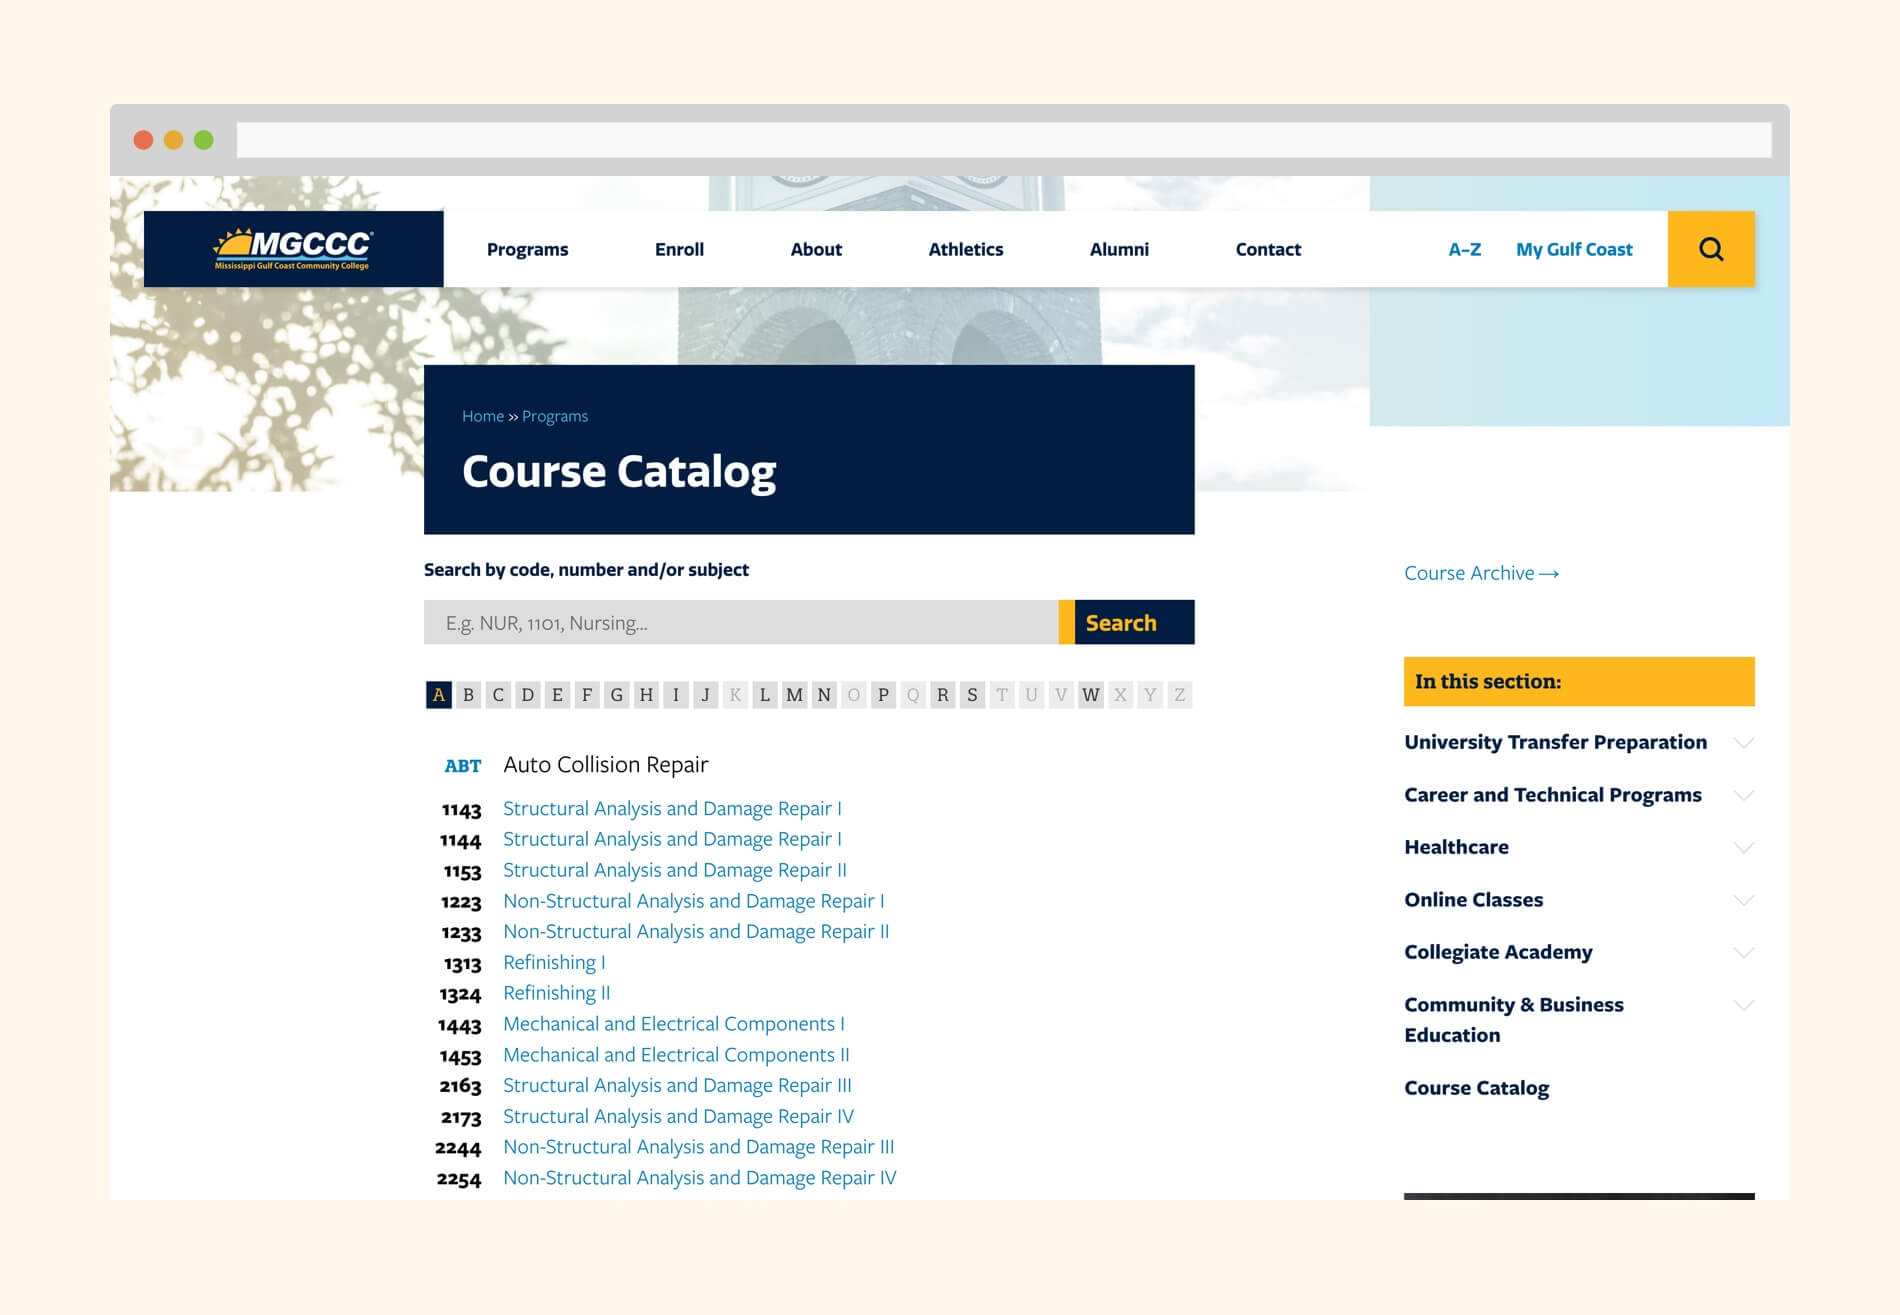 Desktop view of the course catalog showing course listings grouped by course prefix. Above the listing is a search field and alphabetical filters.